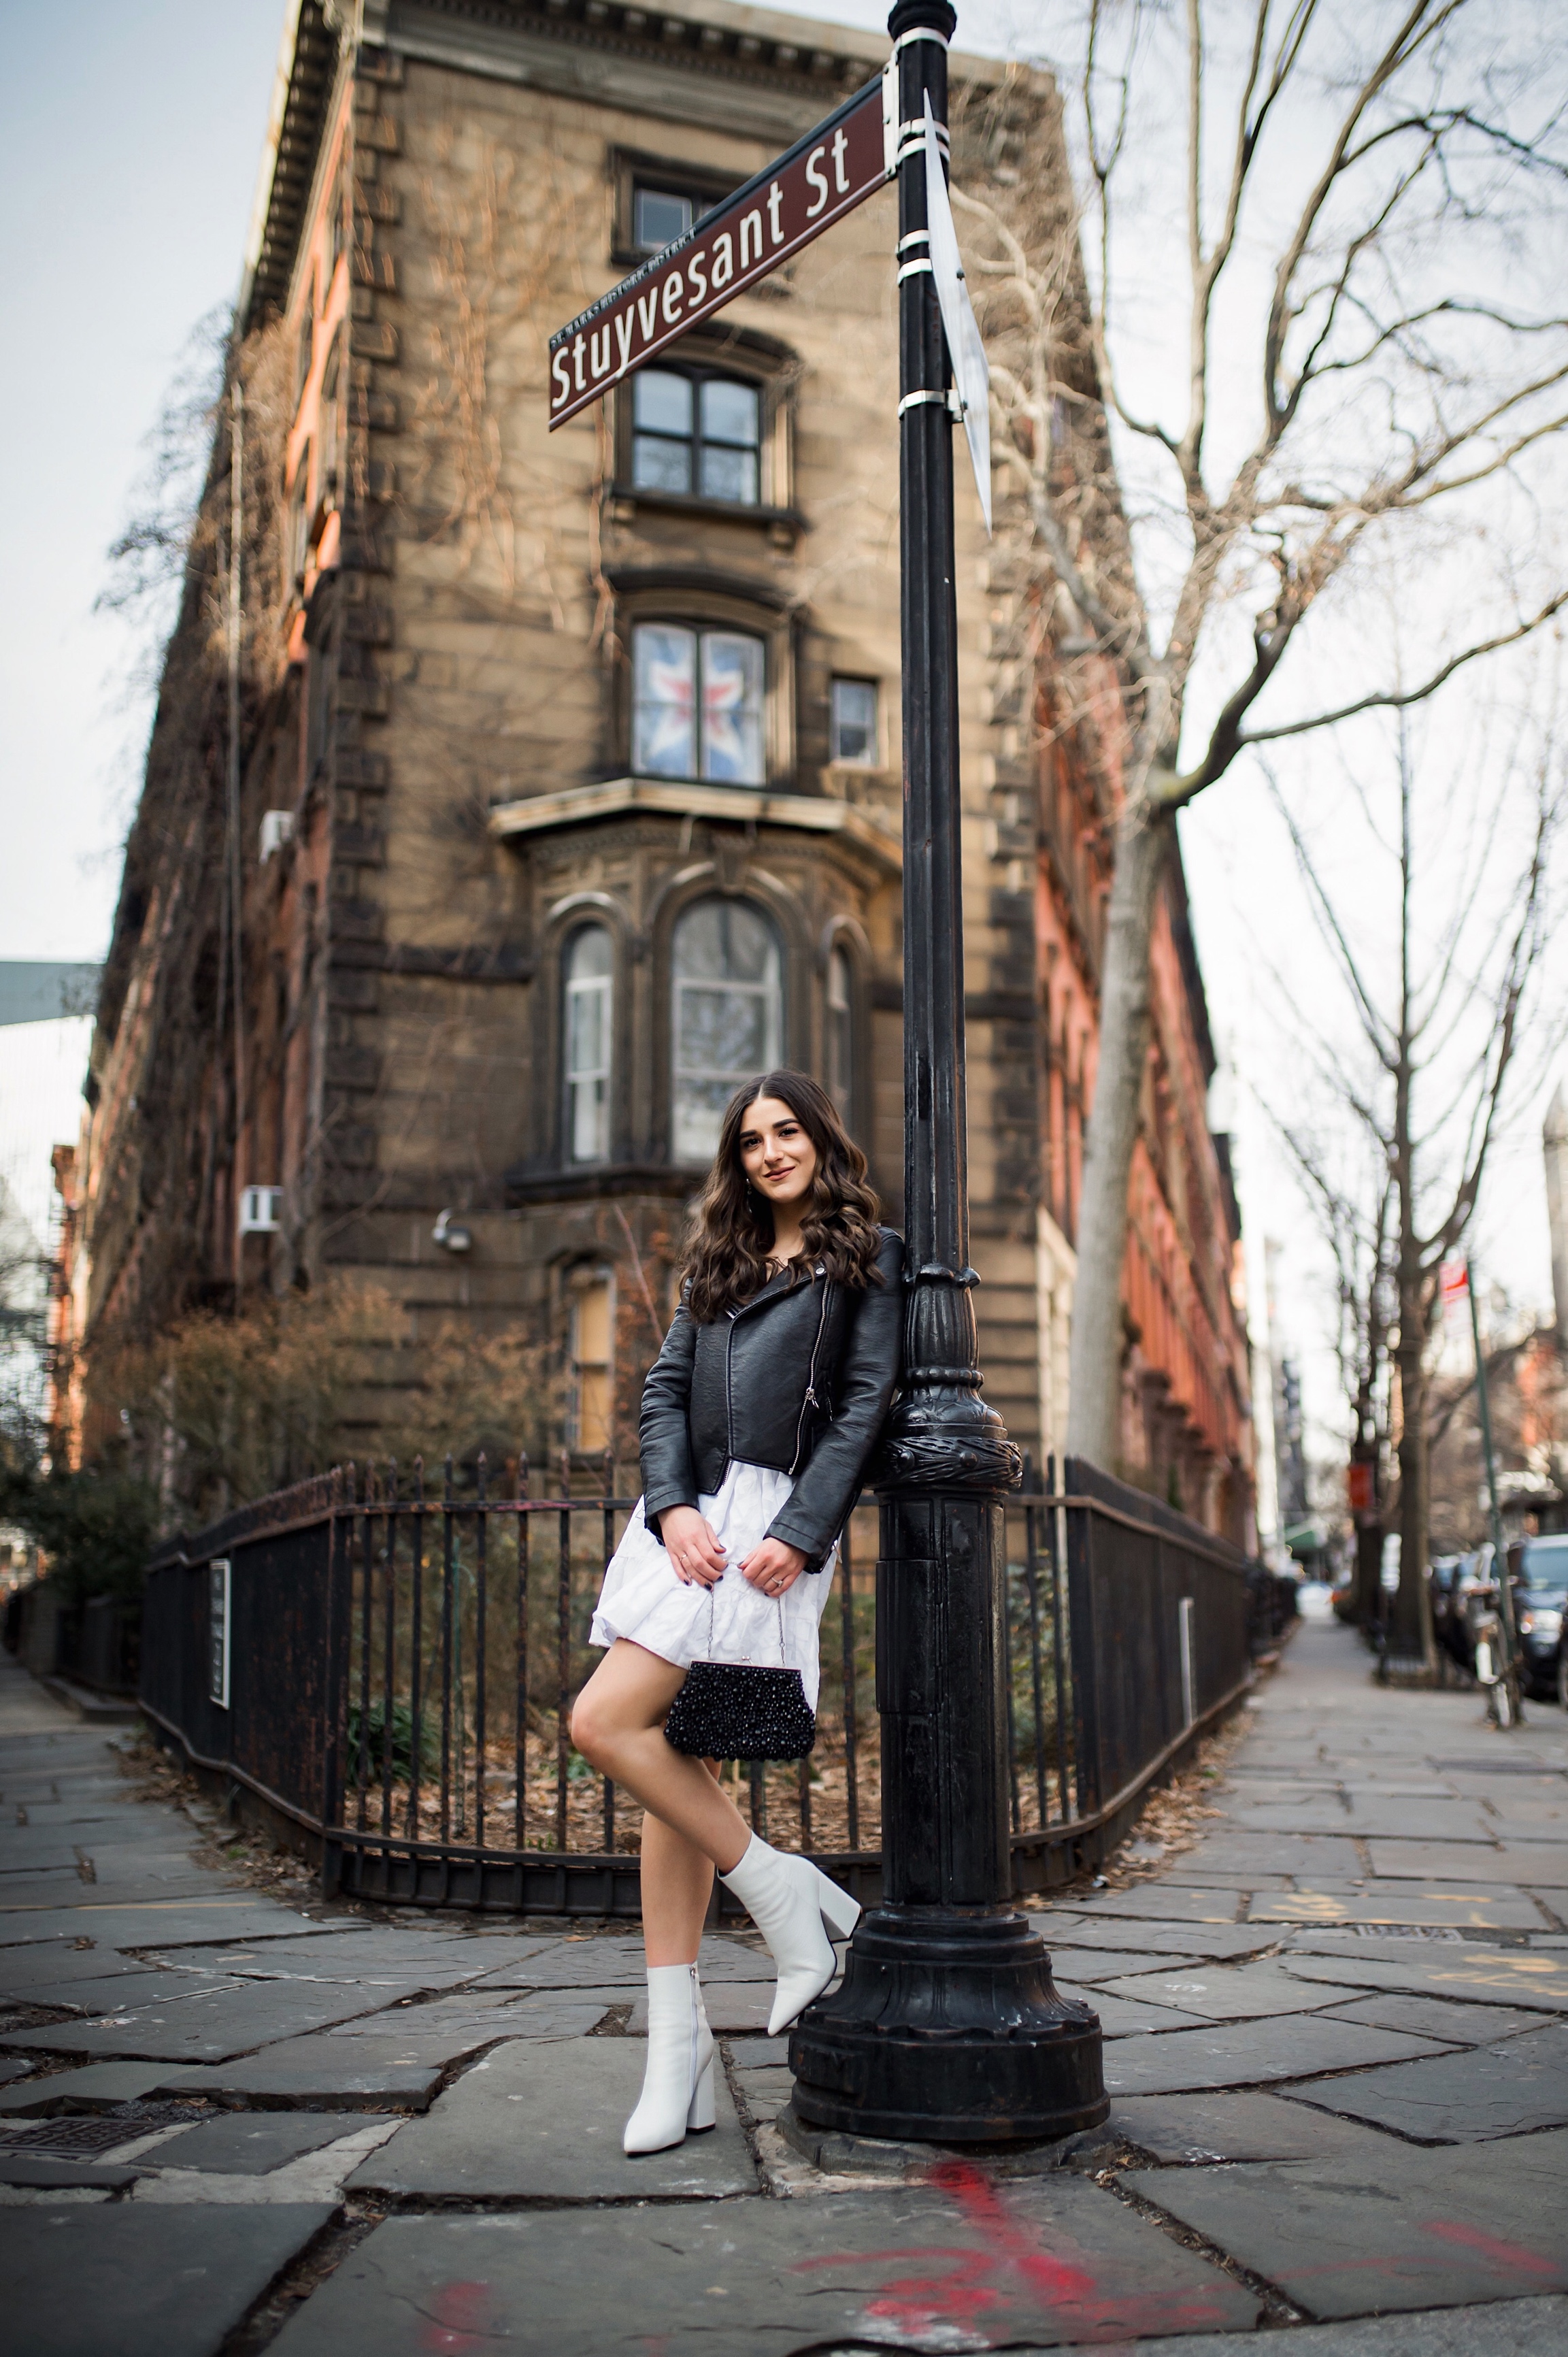 5 Things I Wish Brands Knew White Dress Leather Jacket Esther Santer Fashion Blog NYC Street Style Blogger Outfit OOTD Trendy Shopping  Girl What How To Wear Urban Outfitters ASOS Belt Booties Black Beaded Clutch Long Hair Photoshoot Stuyvesant Shop.JPG